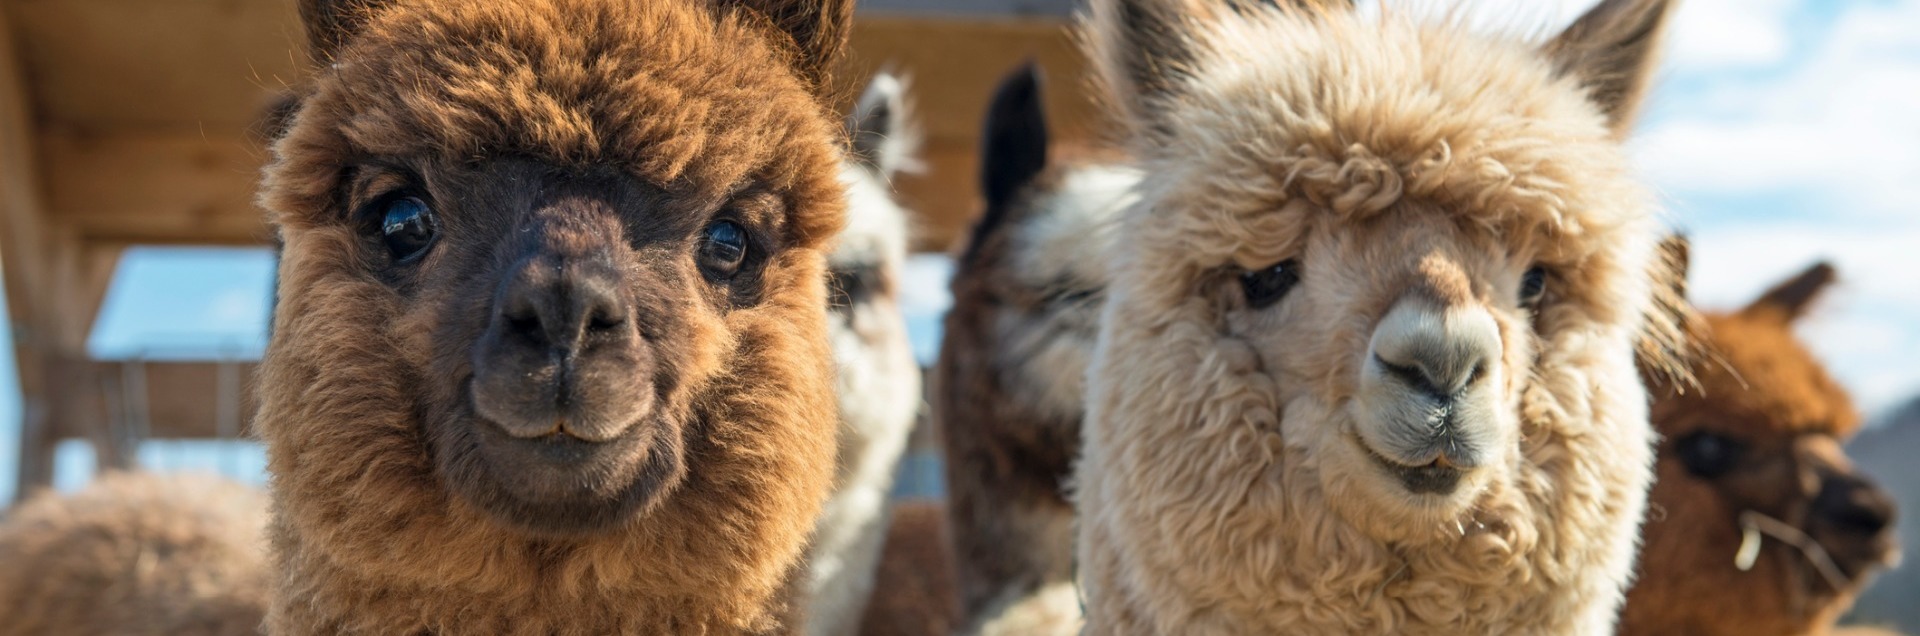 Two brown alpacas, the one on the left is a dark brown and the one on the right is a lighter brown